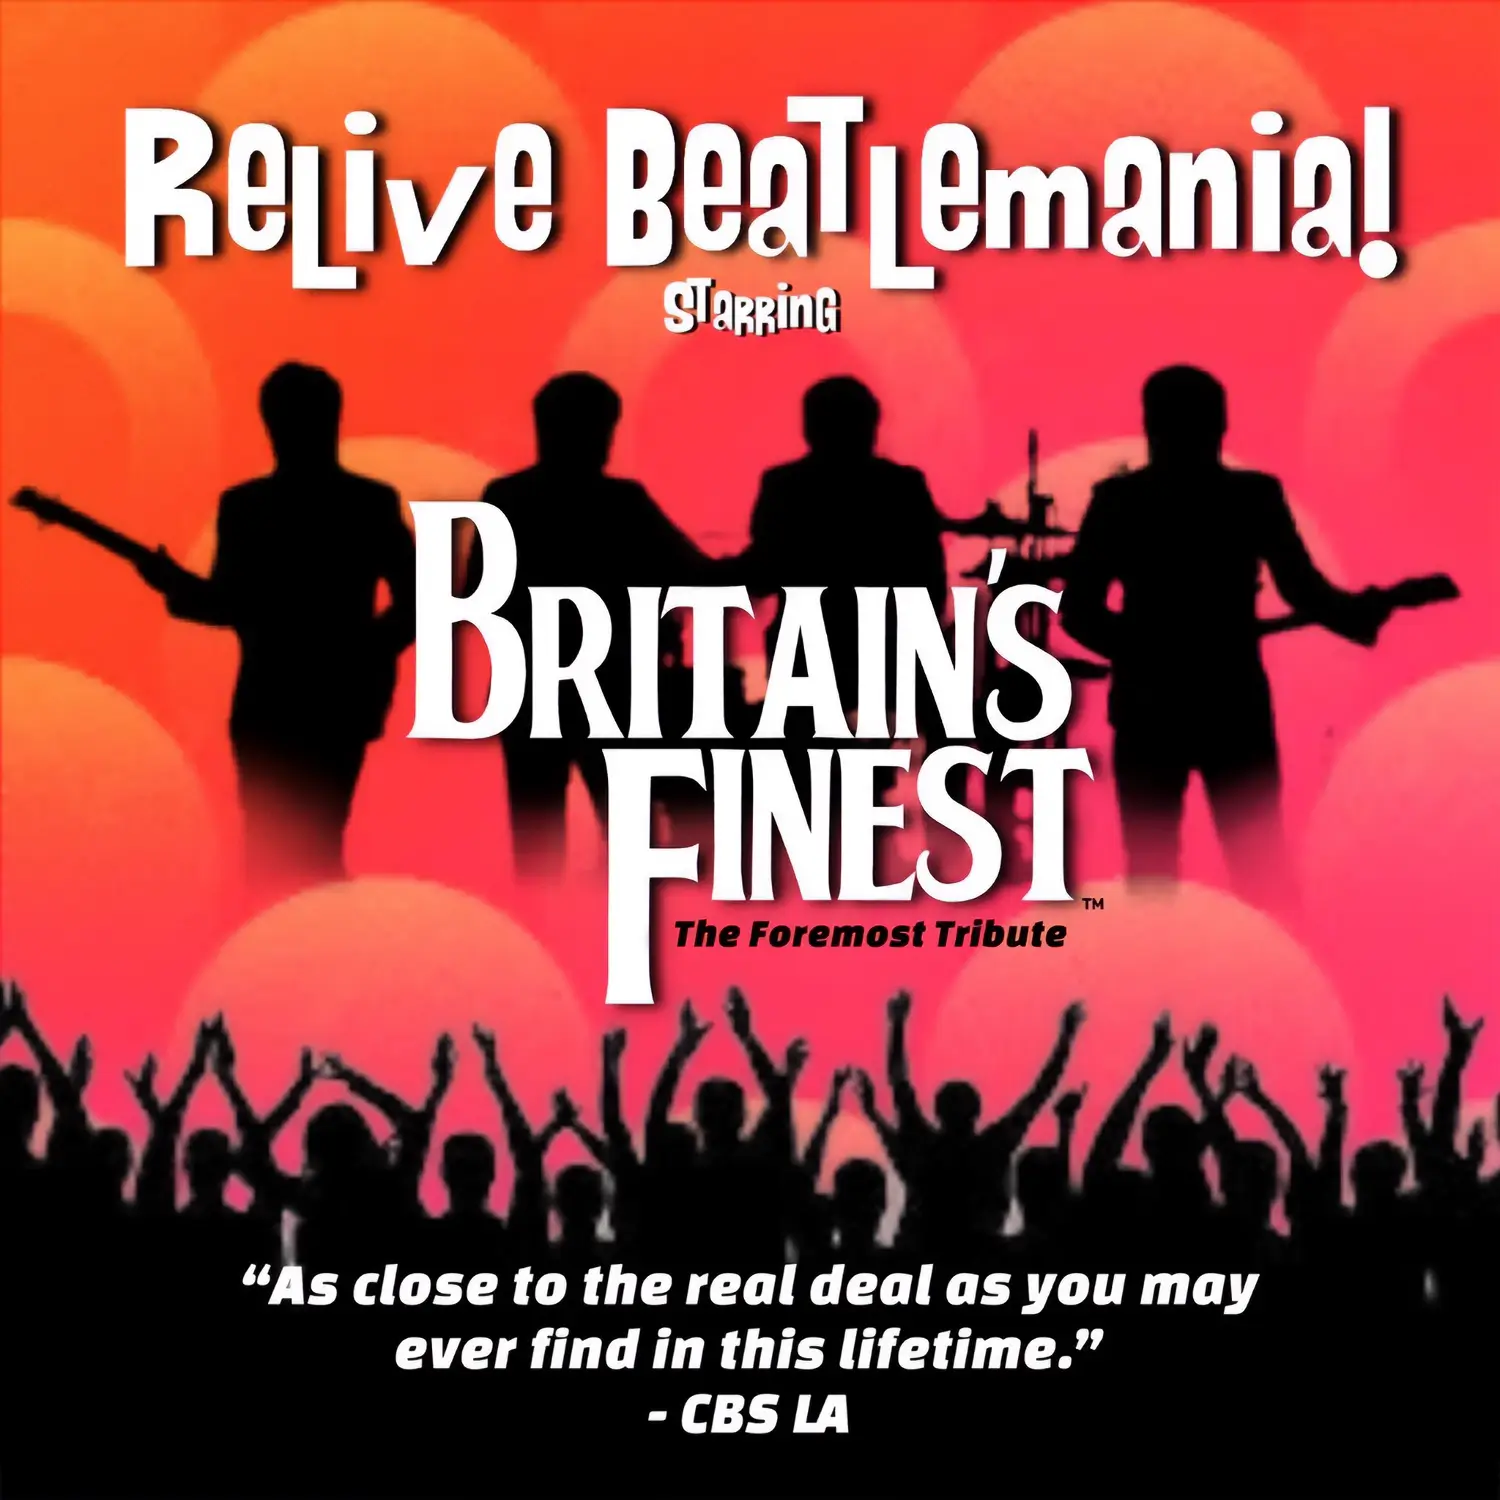 Britain's Finest | the Foremost Tribute to The Beatles